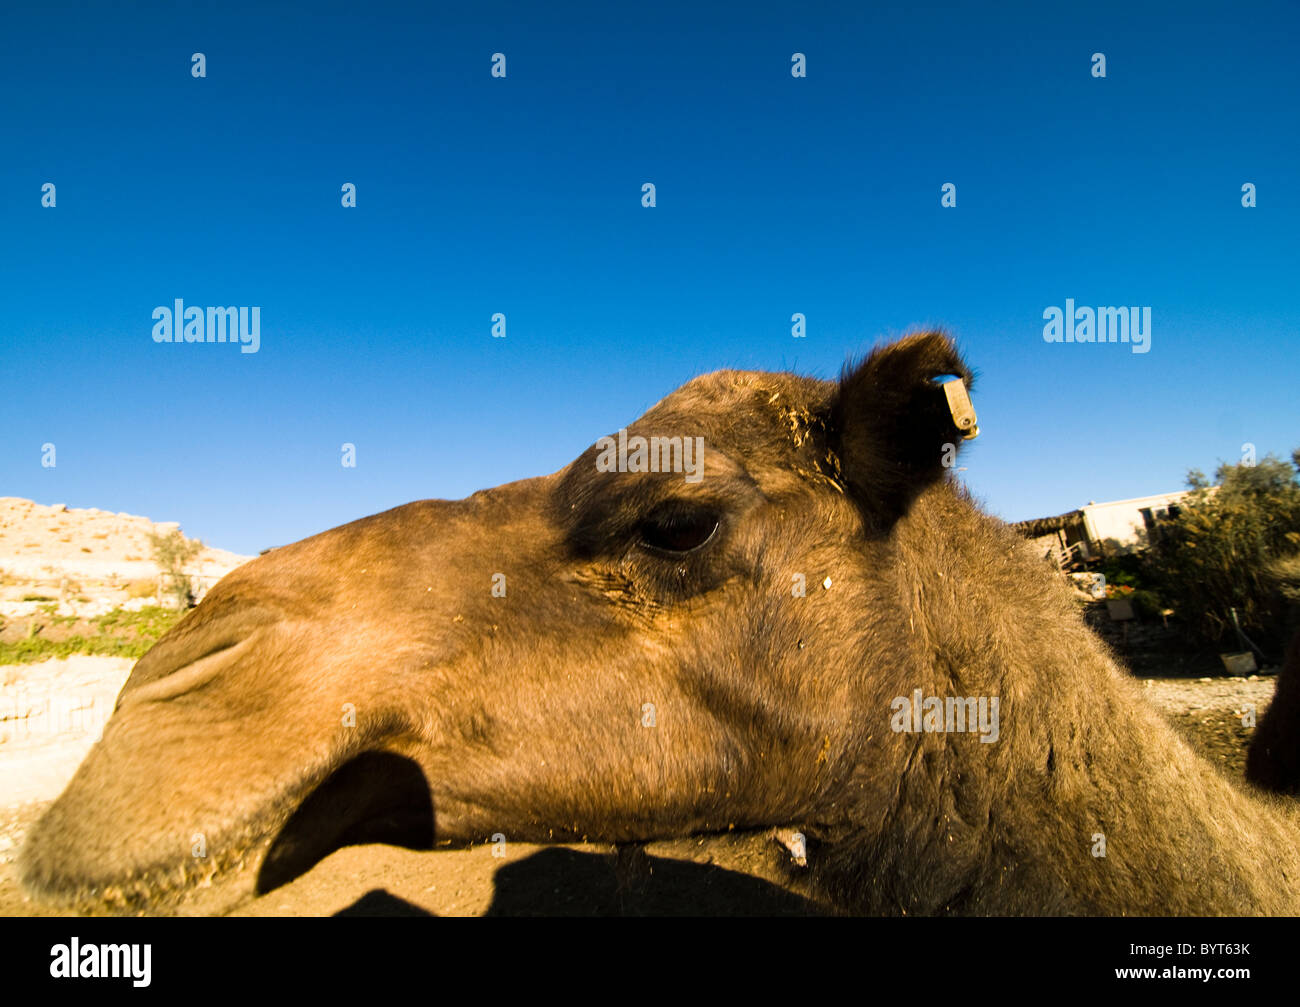 portrait of a funny but cute camel. Stock Photo